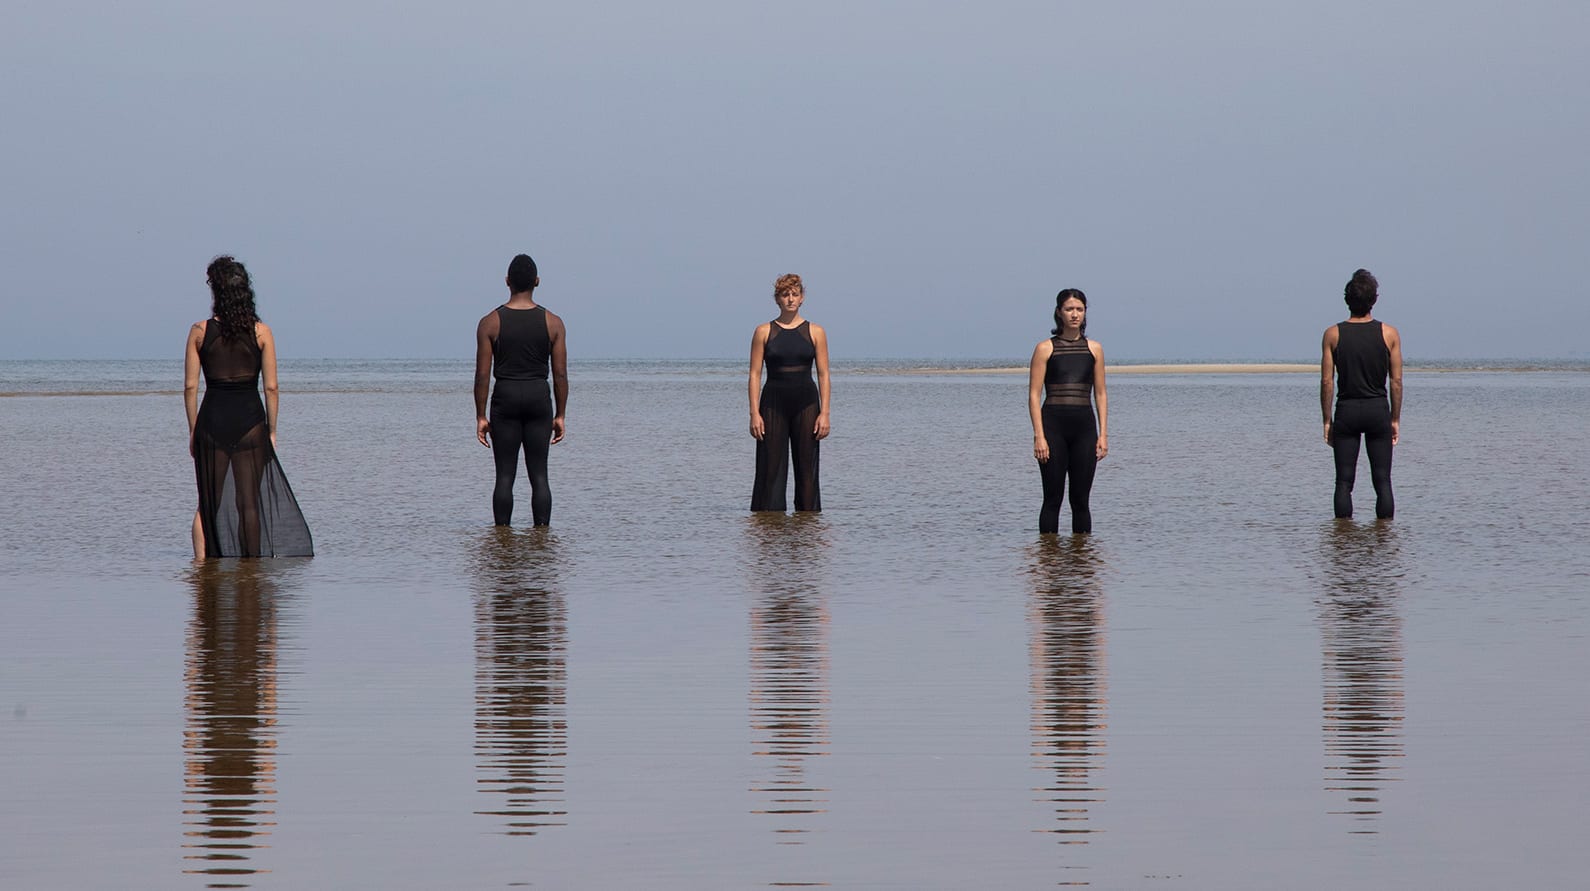 Performers from the Boston Dance Theater pose amid the rising tide along the Cape Cod coastline. (Photo courtesy of Larry Pratt, © Boston Dance Theater)